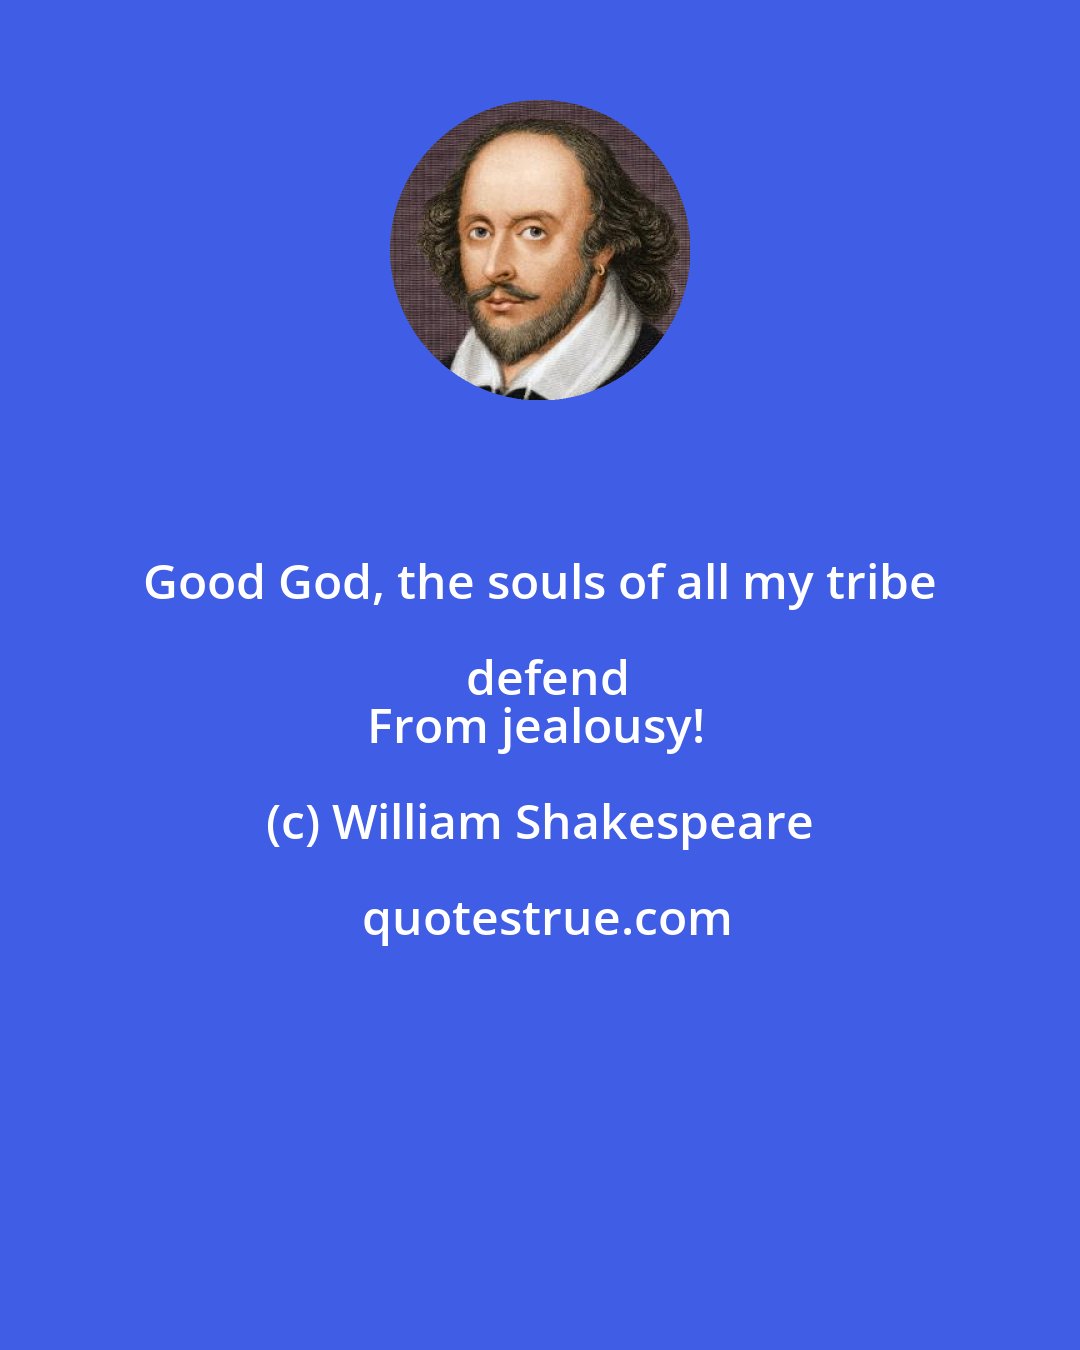 William Shakespeare: Good God, the souls of all my tribe defend
From jealousy!